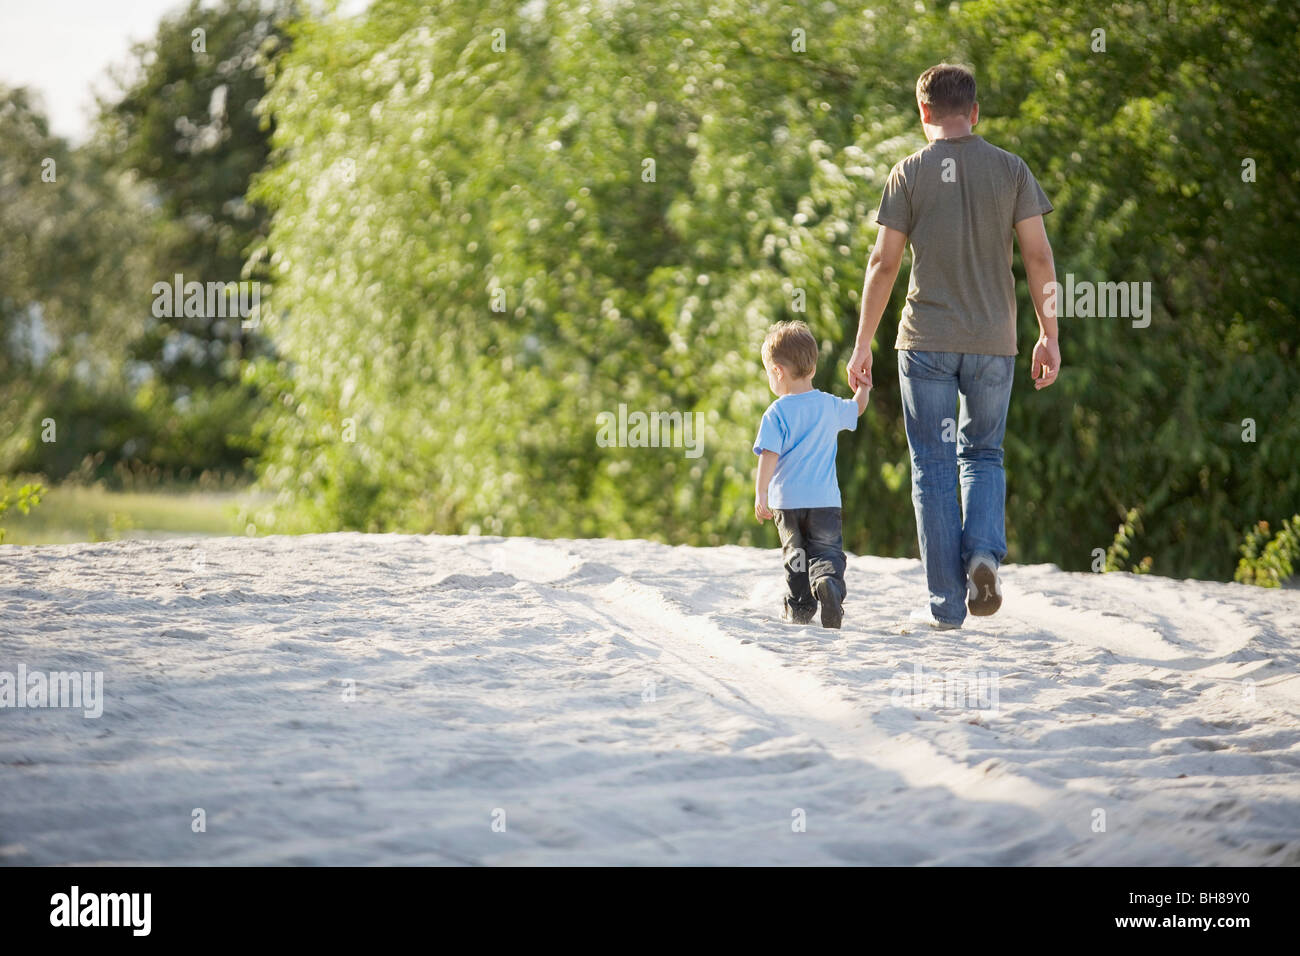 Rear view of a man and a young boy walking hand in hand Stock Photo